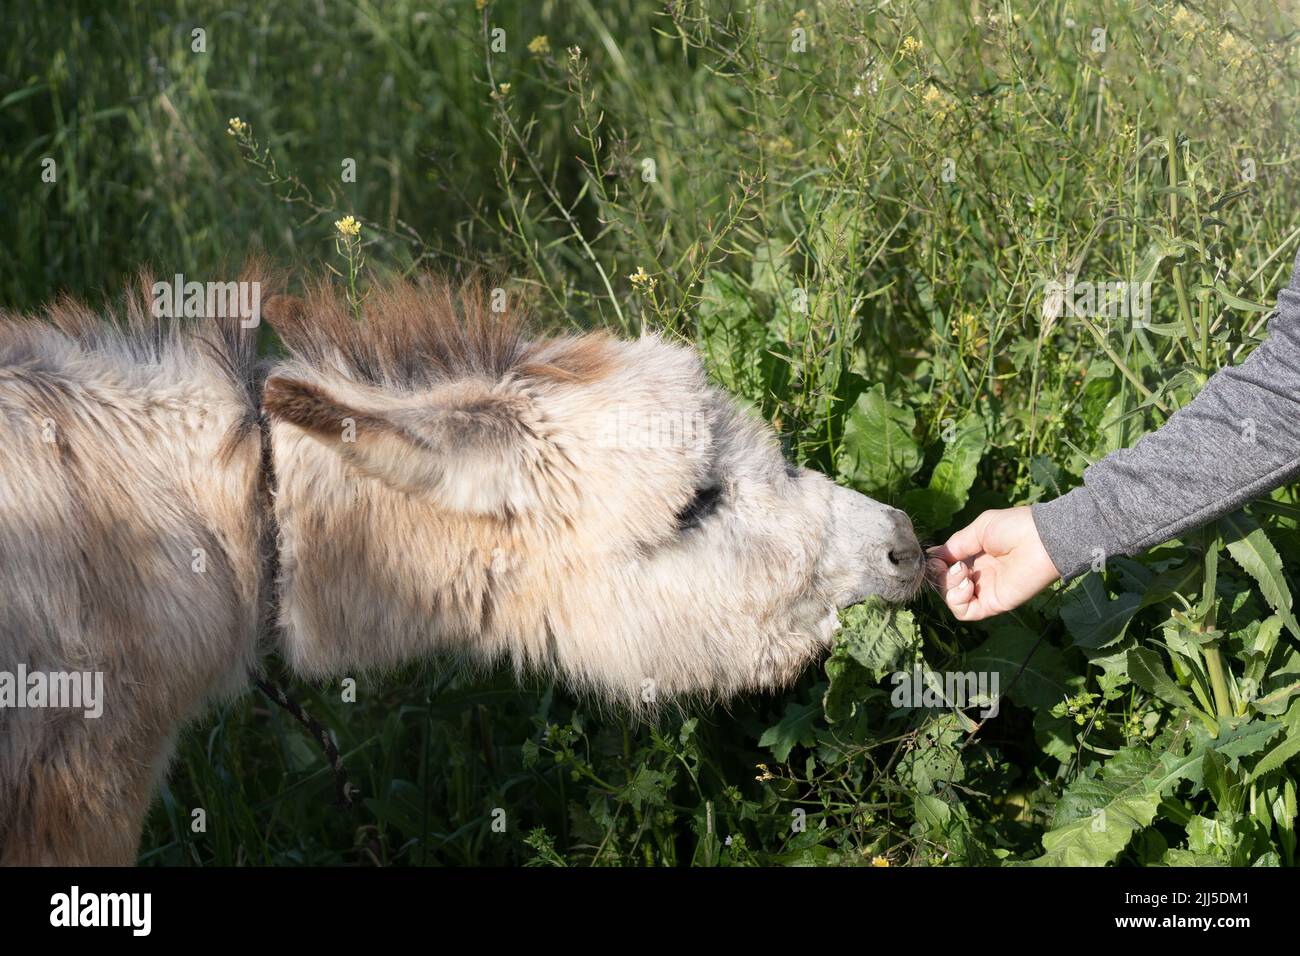 Anonymous person giving fresh green grass to cute donkey in field in sunny summer day. The farmer hand-feeds funny donkey with plant. Natural organic farming concept. Stock Photo